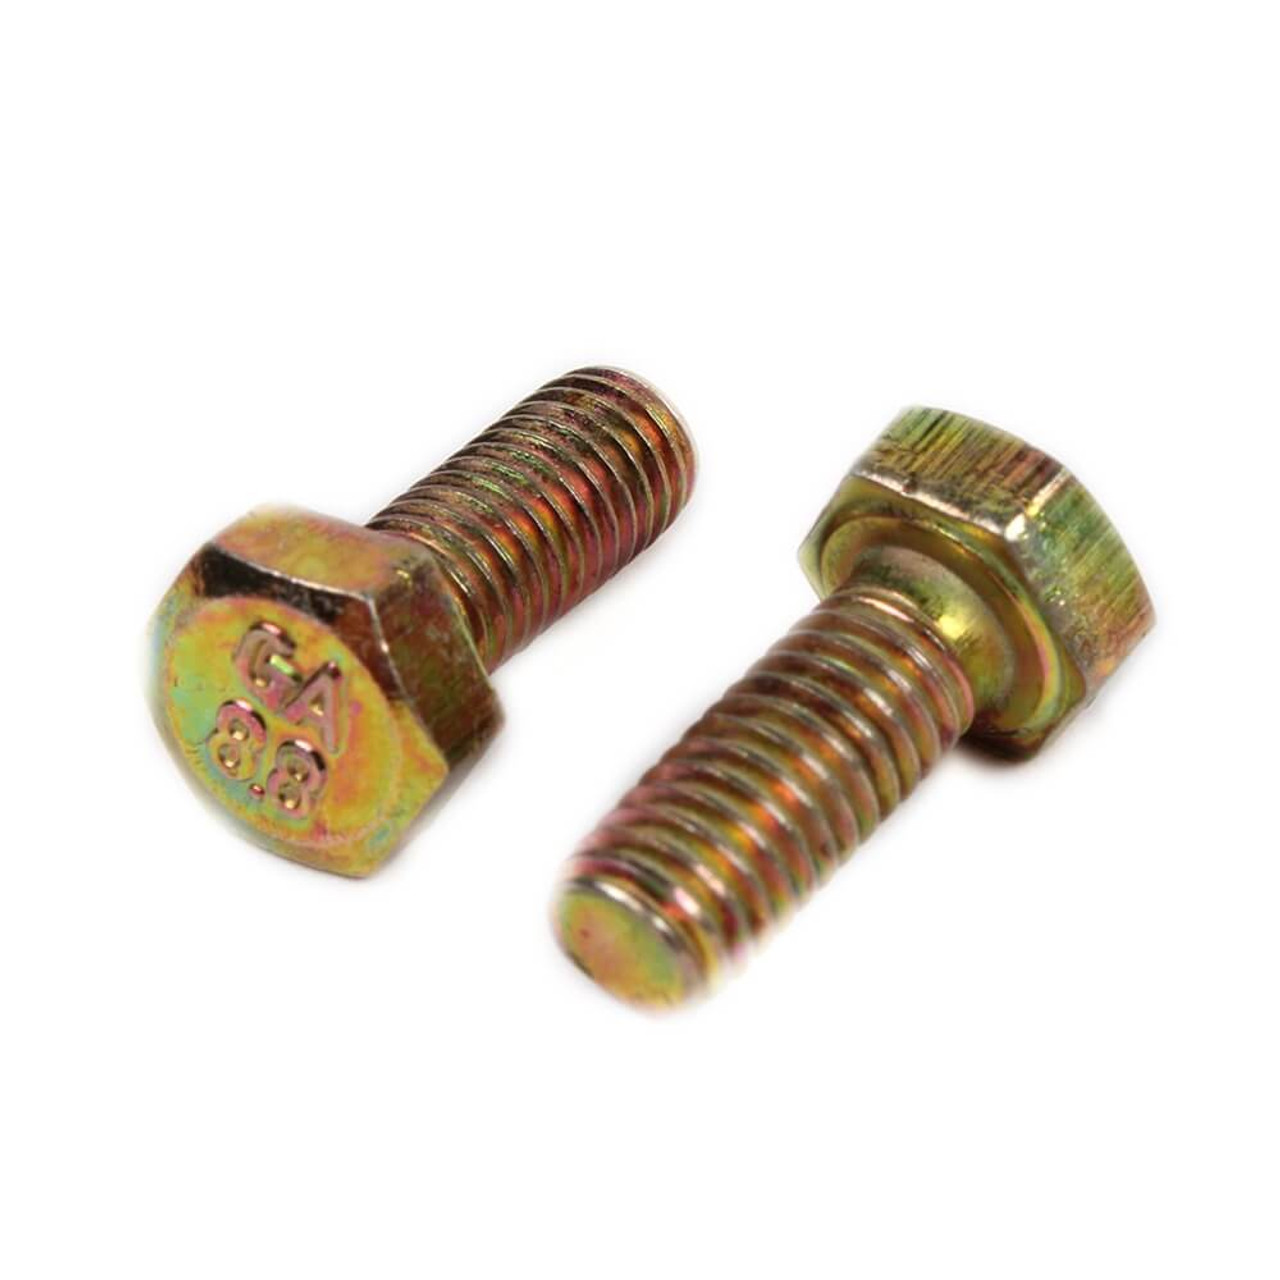 M5 x 12mm STATOR BOLTS FOR 50cc QMB139 & 150cc GY6 CHINESE SCOOTERS *2 PACK*